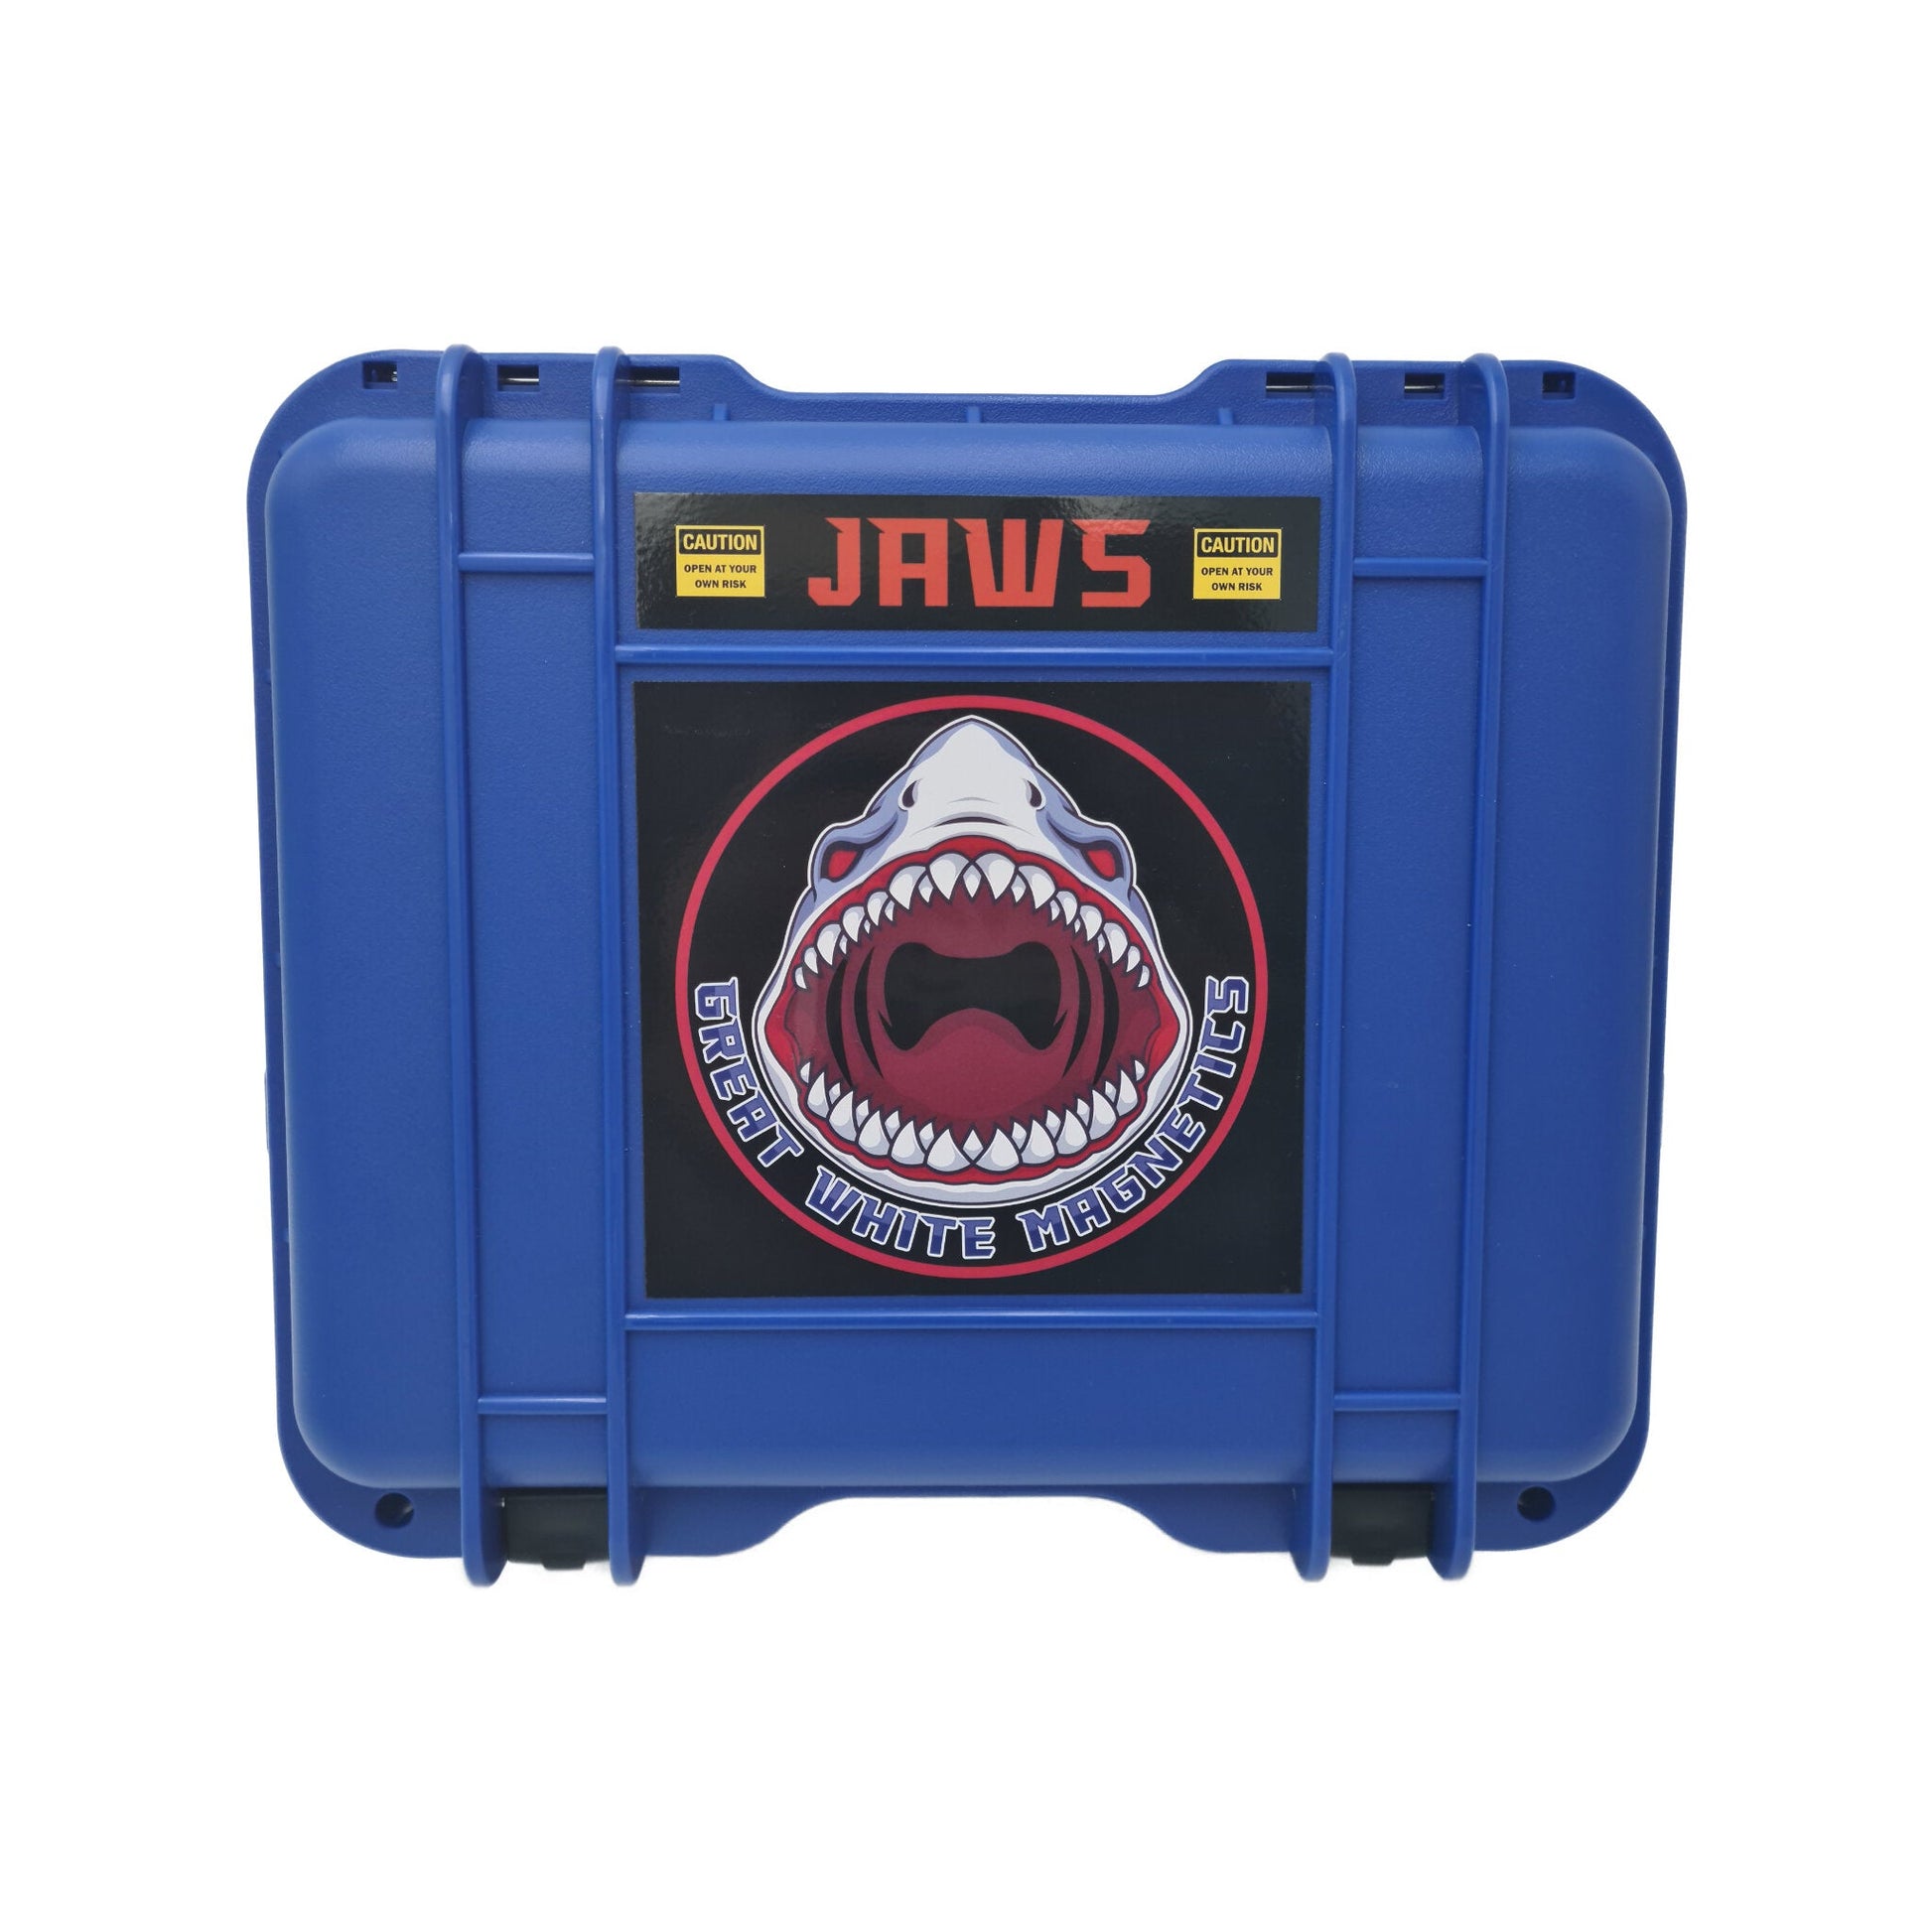 Heavy duty blue case for magnet fishing jaws kit